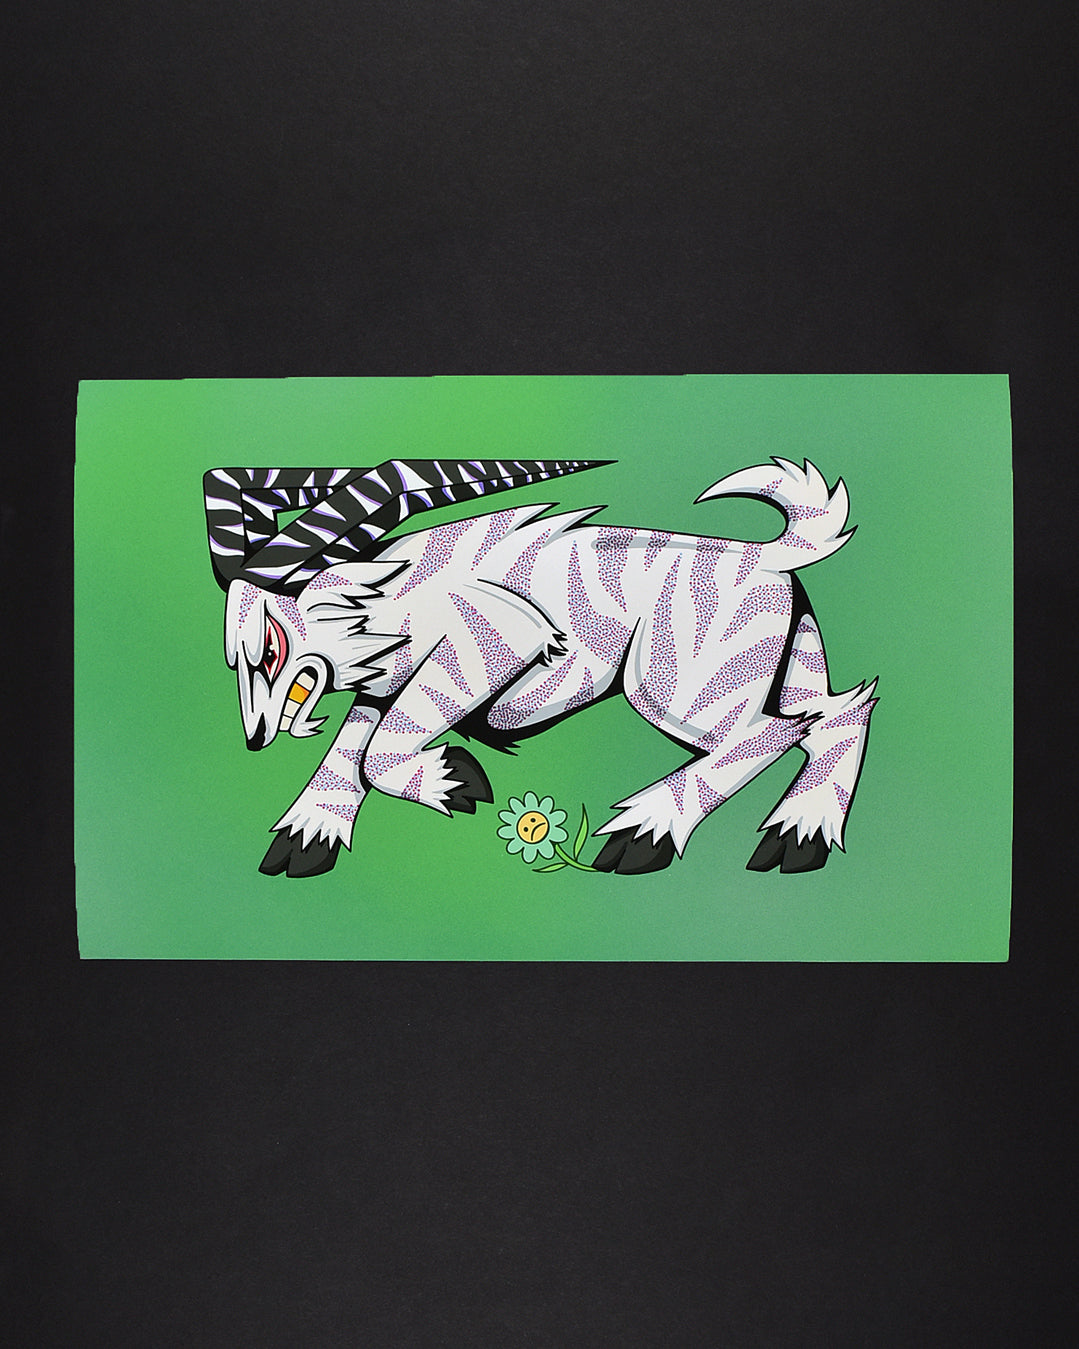 A giclee painting of a purple striped ibex creature with 1 gold fang and long horns.  It's head is down in a striking pose as it is stepping on a flower that has a sad face in the center.  The background is green. Original art of the Pathbreaker Ibex creature from Hasbro's Magic the Gathering.